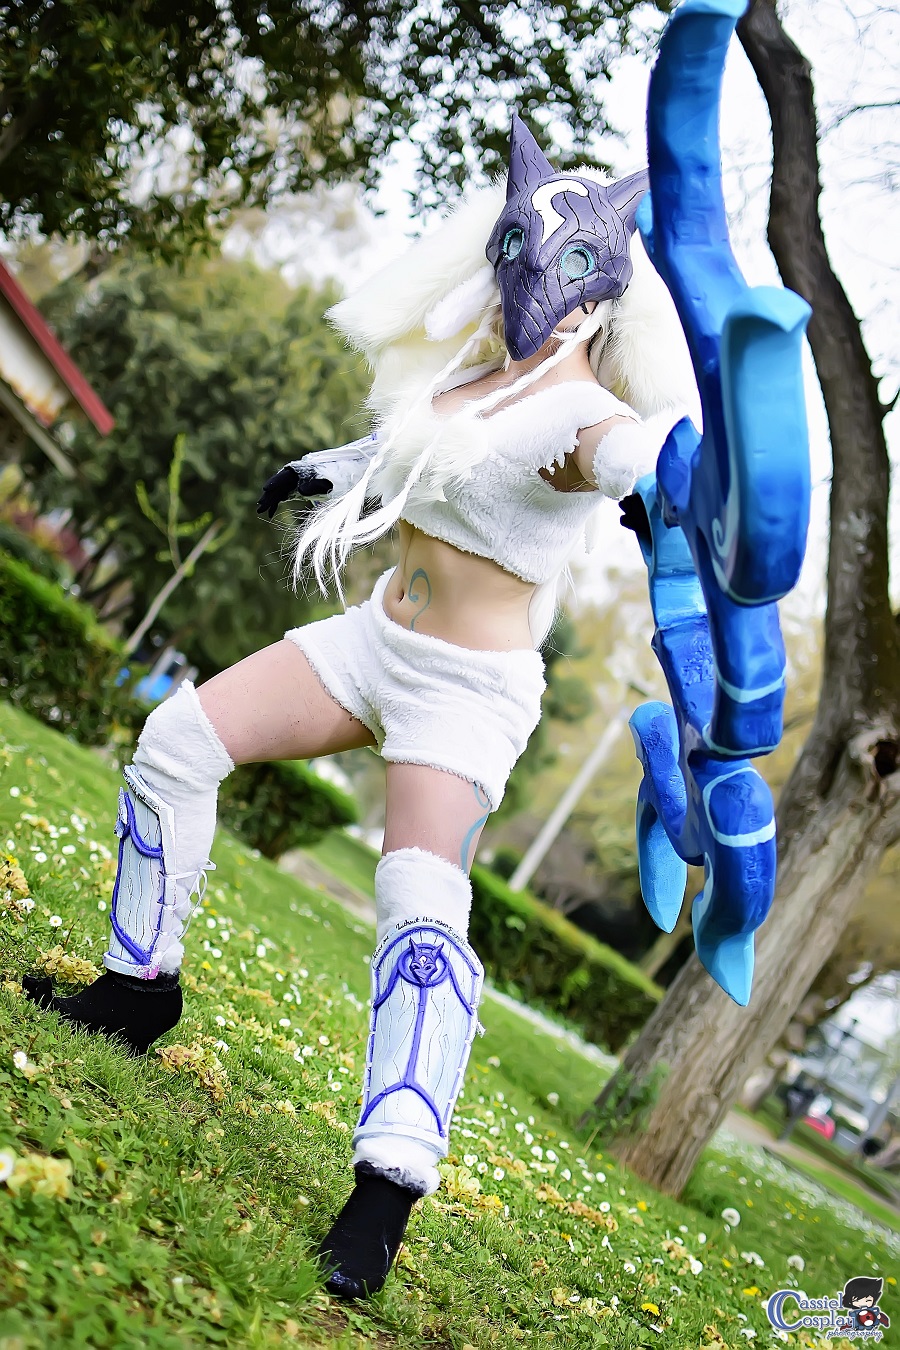 kindred-cosplay-lol (1)